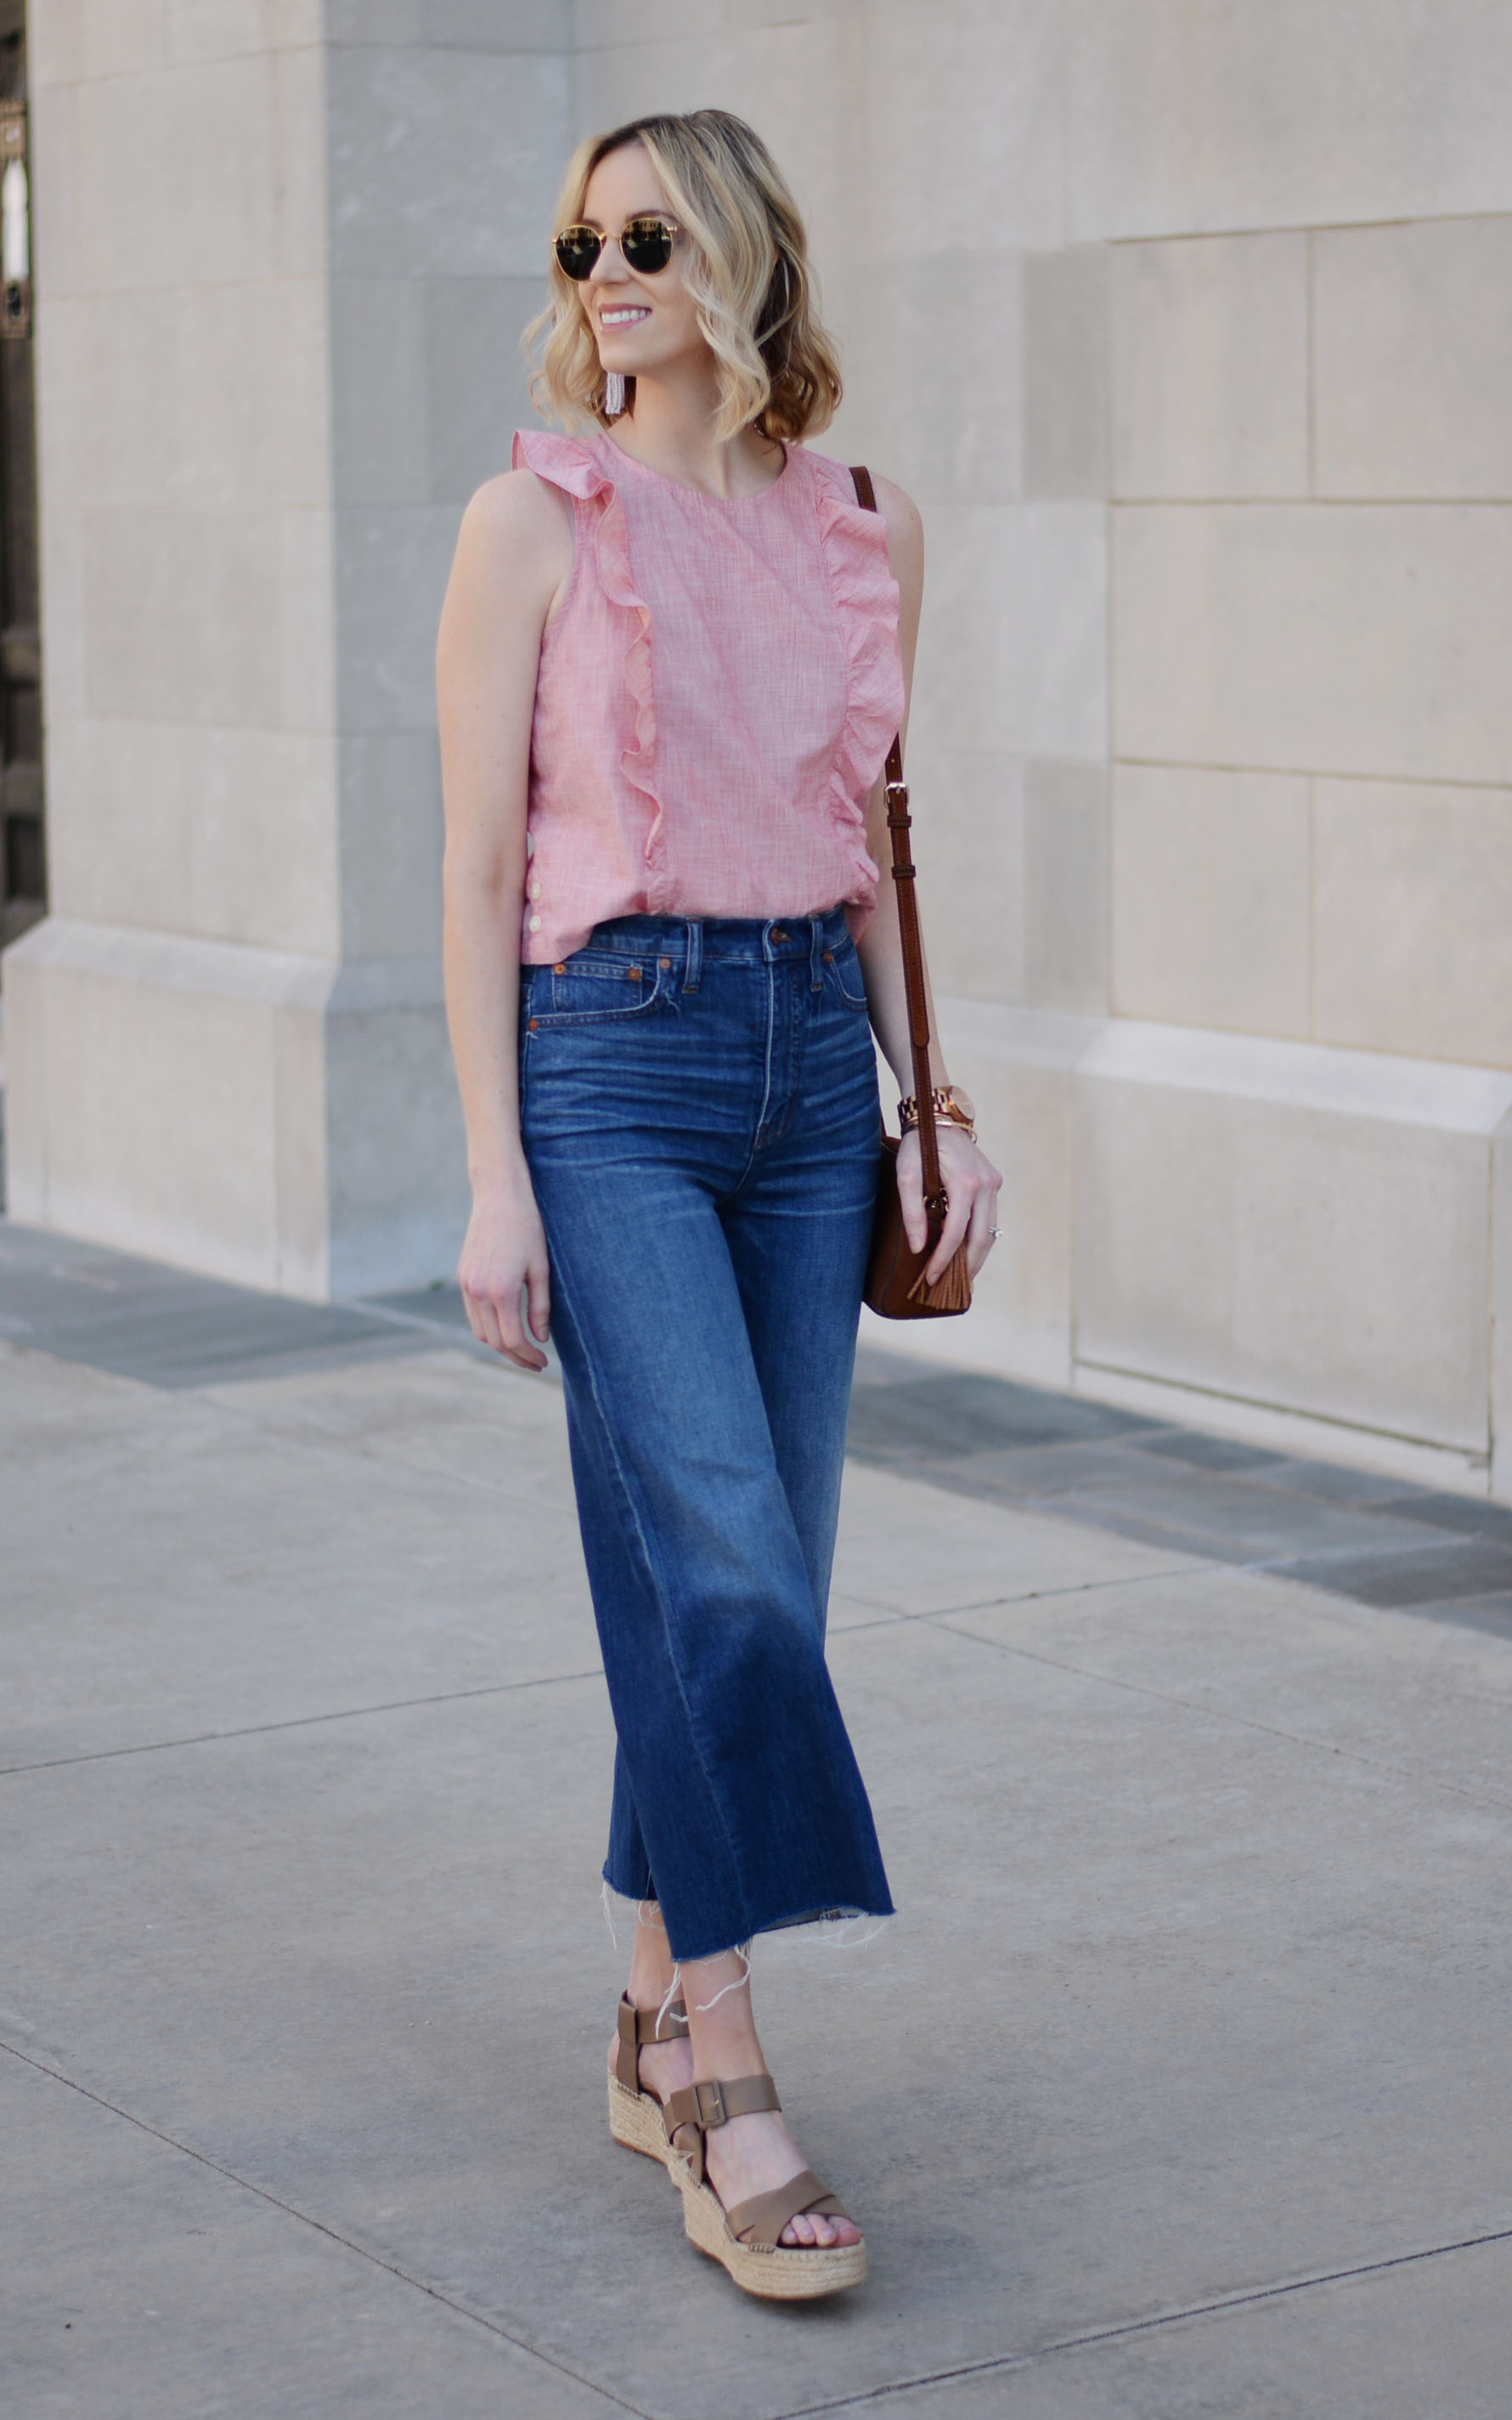 Denim Culottes and Crop Tops - Straight A Style